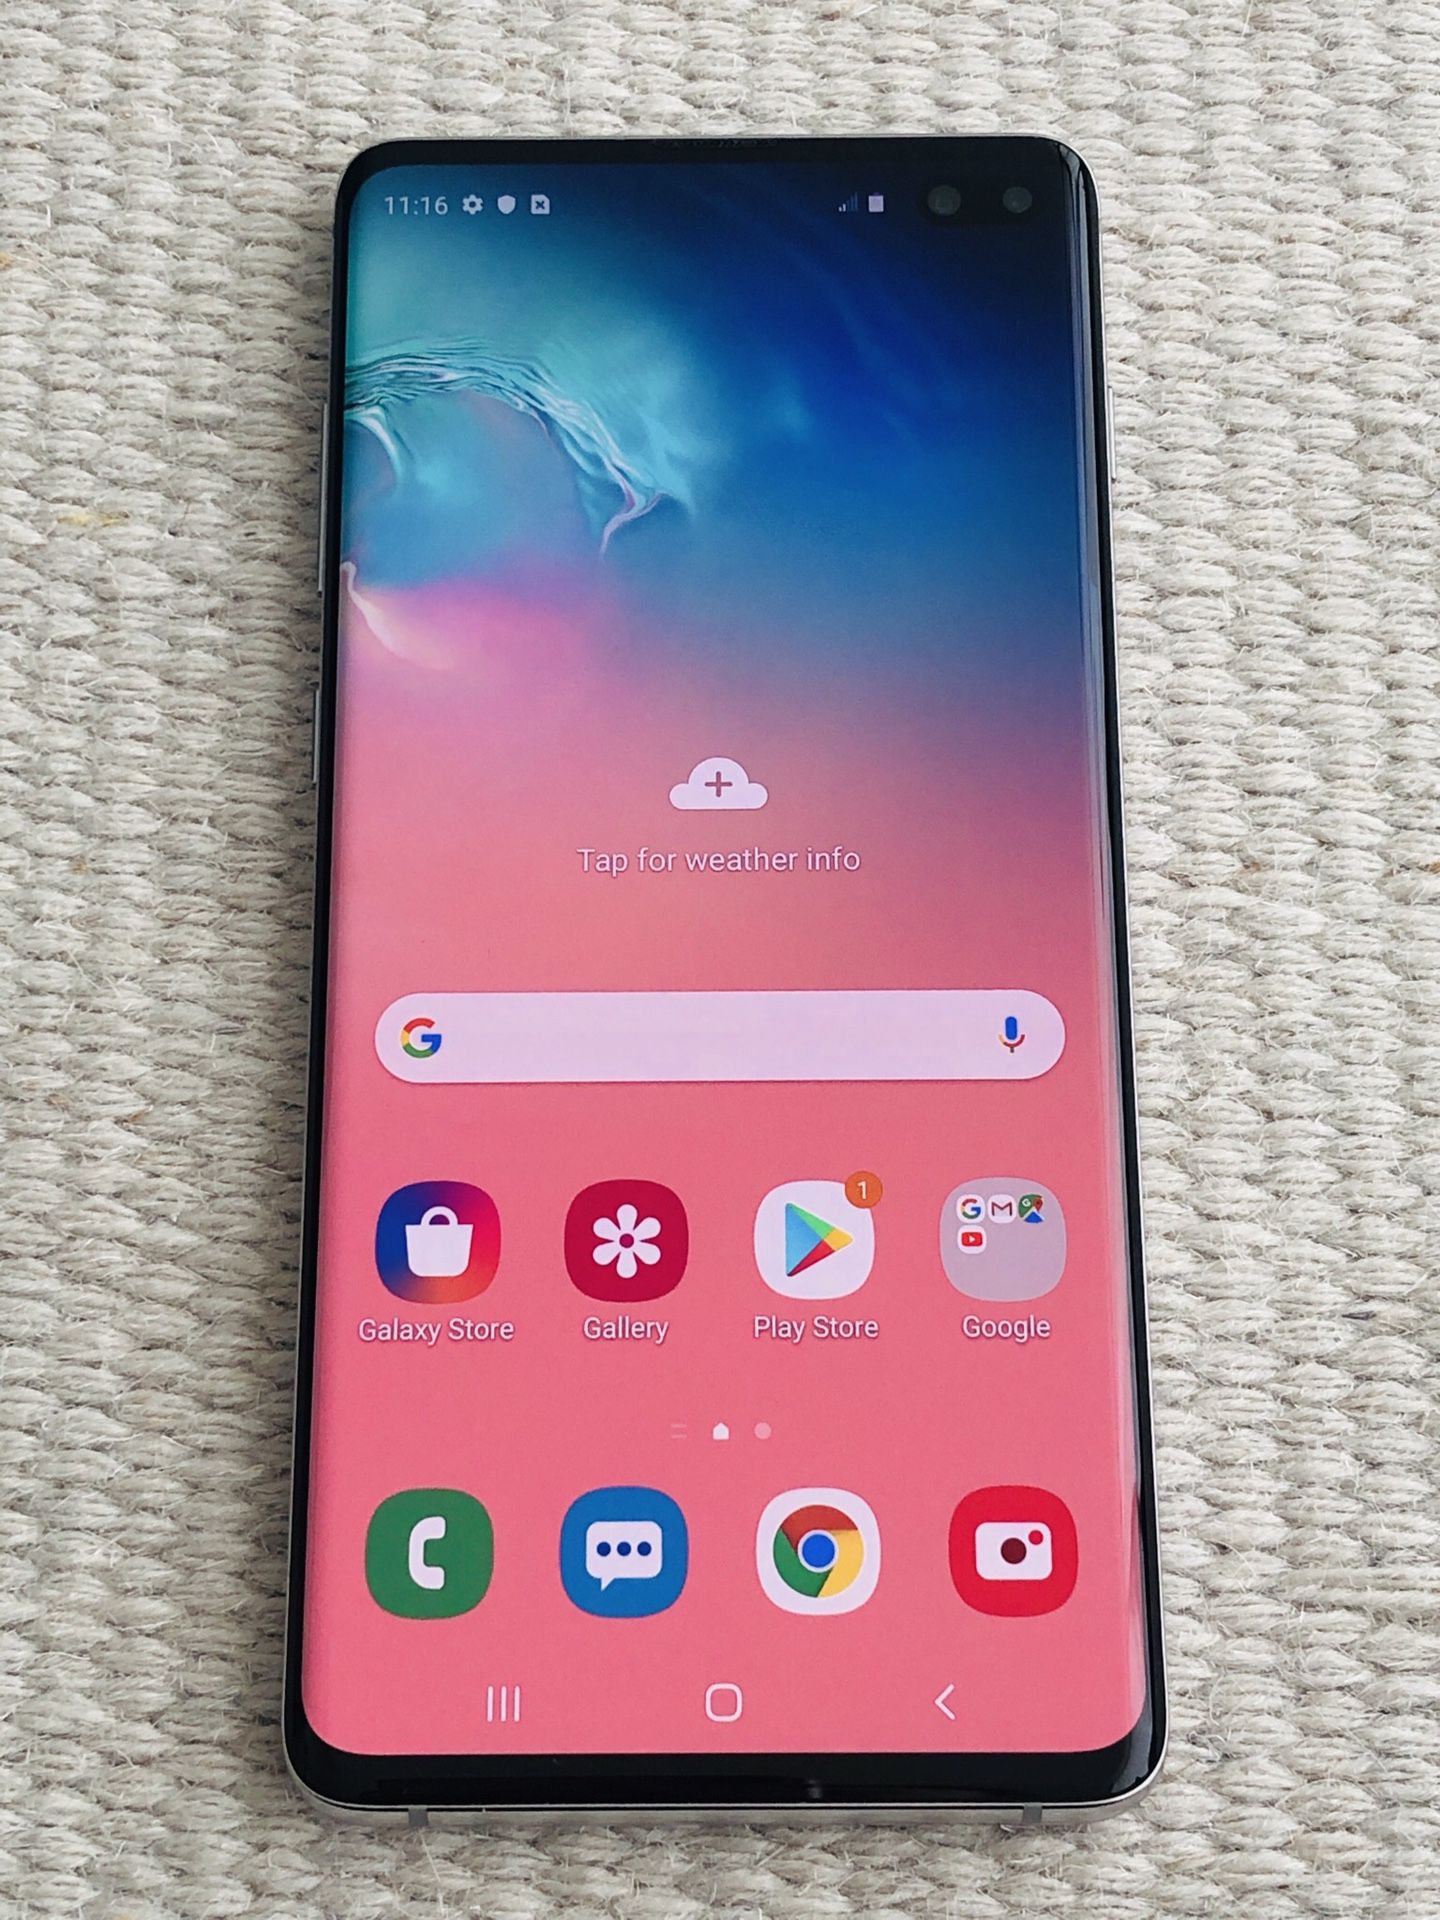 EXCELLENT Unlocked Samsung Galaxy S10 + Plus Unlocked, any company, Excellent condition. Works with Verizon, Att, Tmobile, Metro pcs, Cricket and o